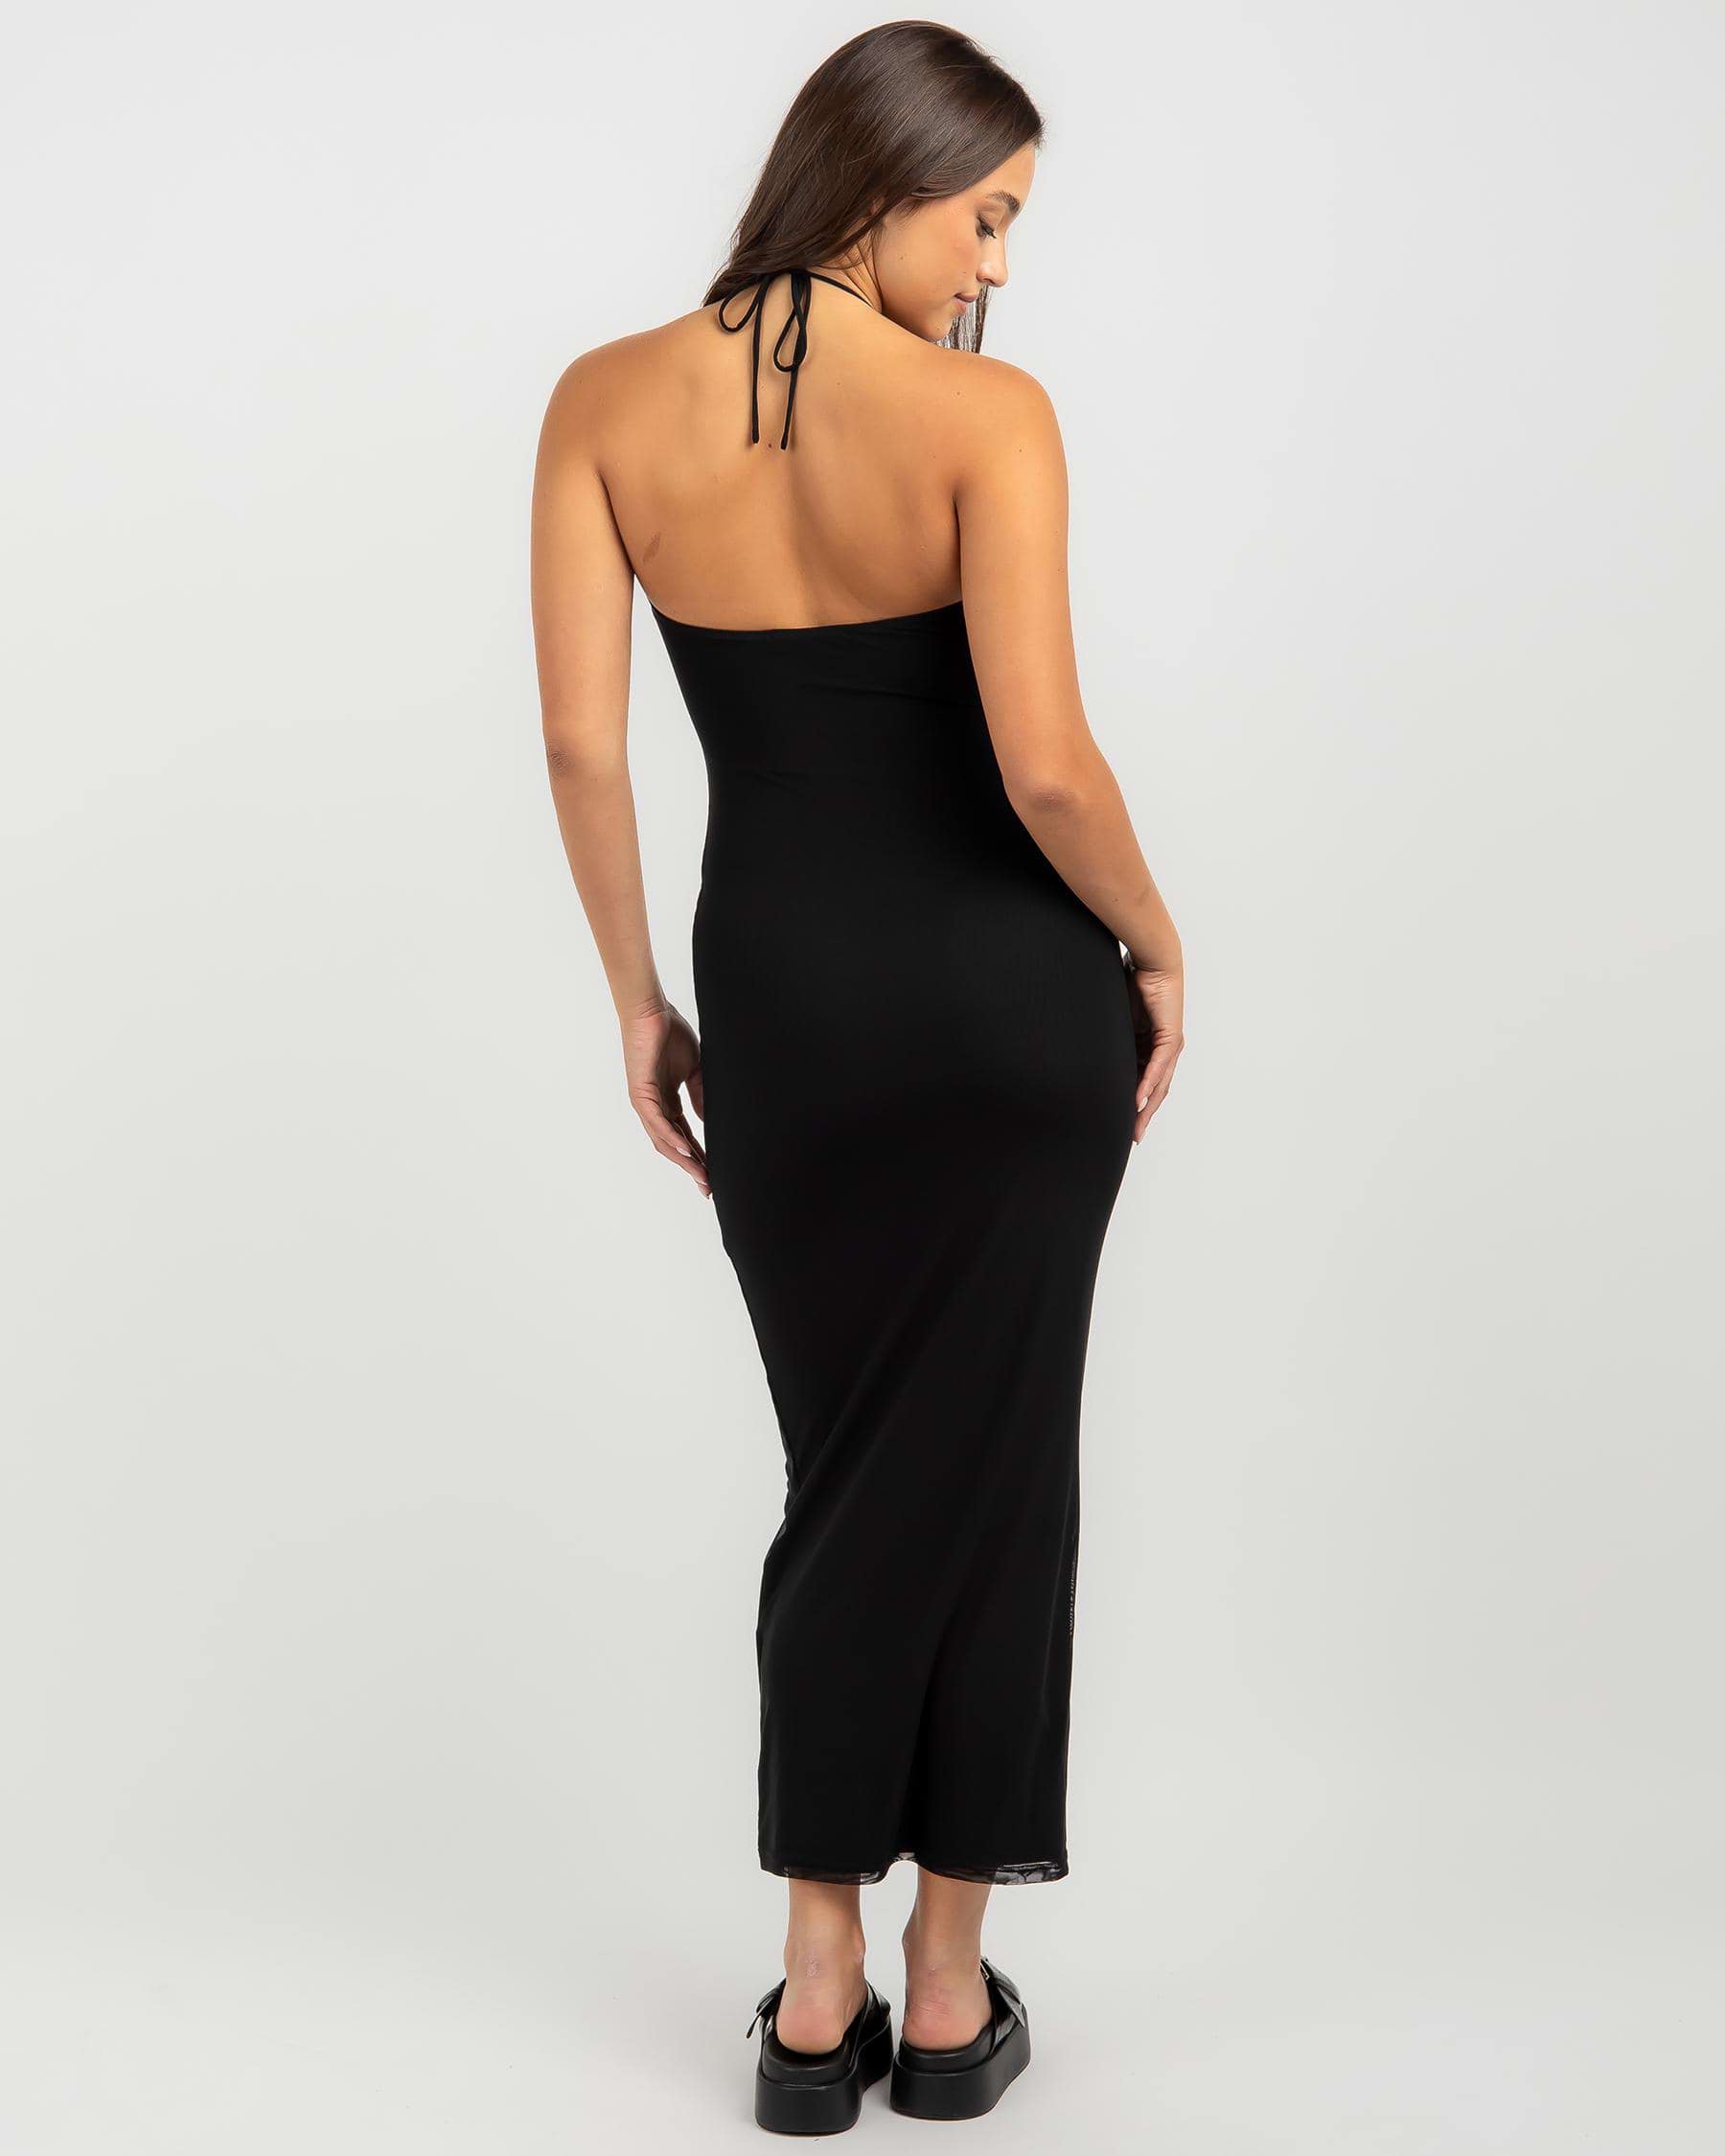 Ava And Ever Samie Maxi Dress In Black - Fast Shipping & Easy Returns ...